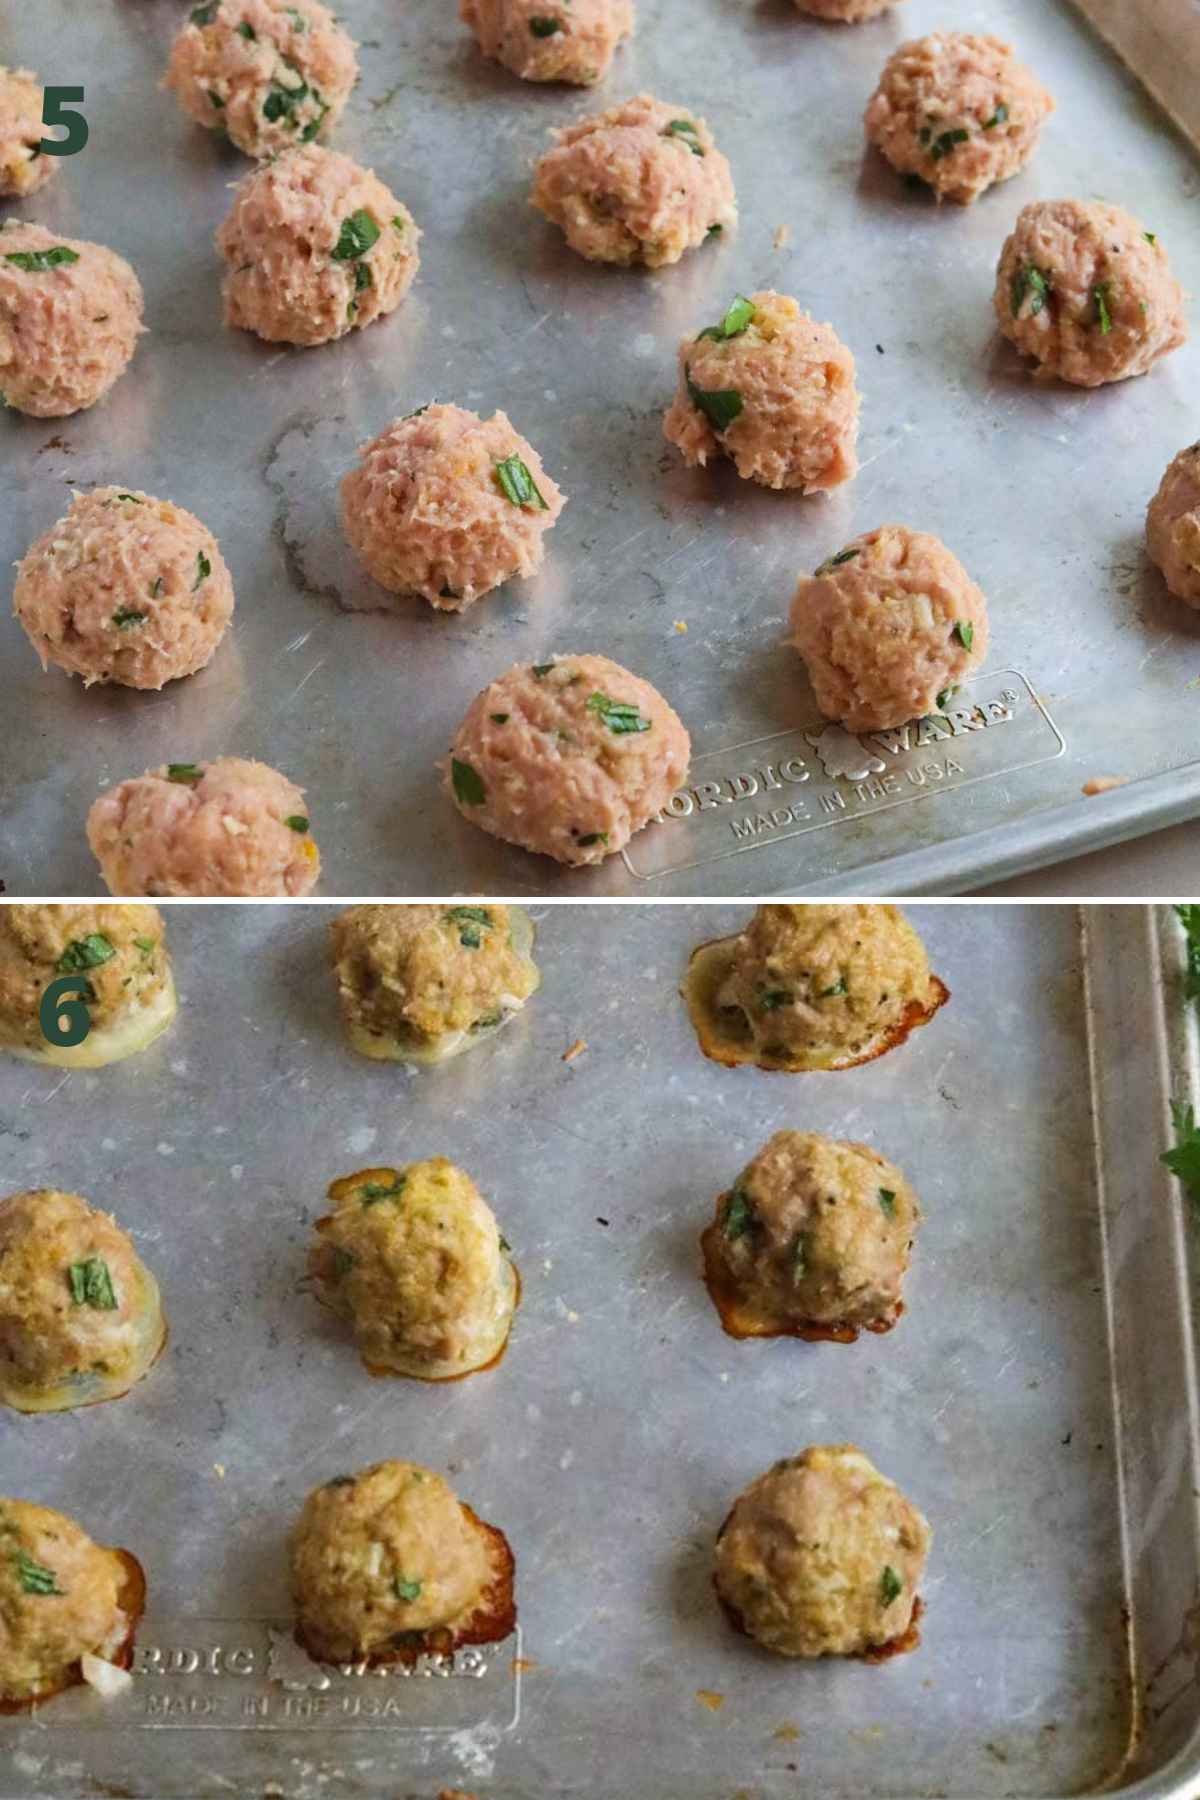 Steps to make healthy baked turkey meatballs, adding meatballs to a baking sheet and baking.